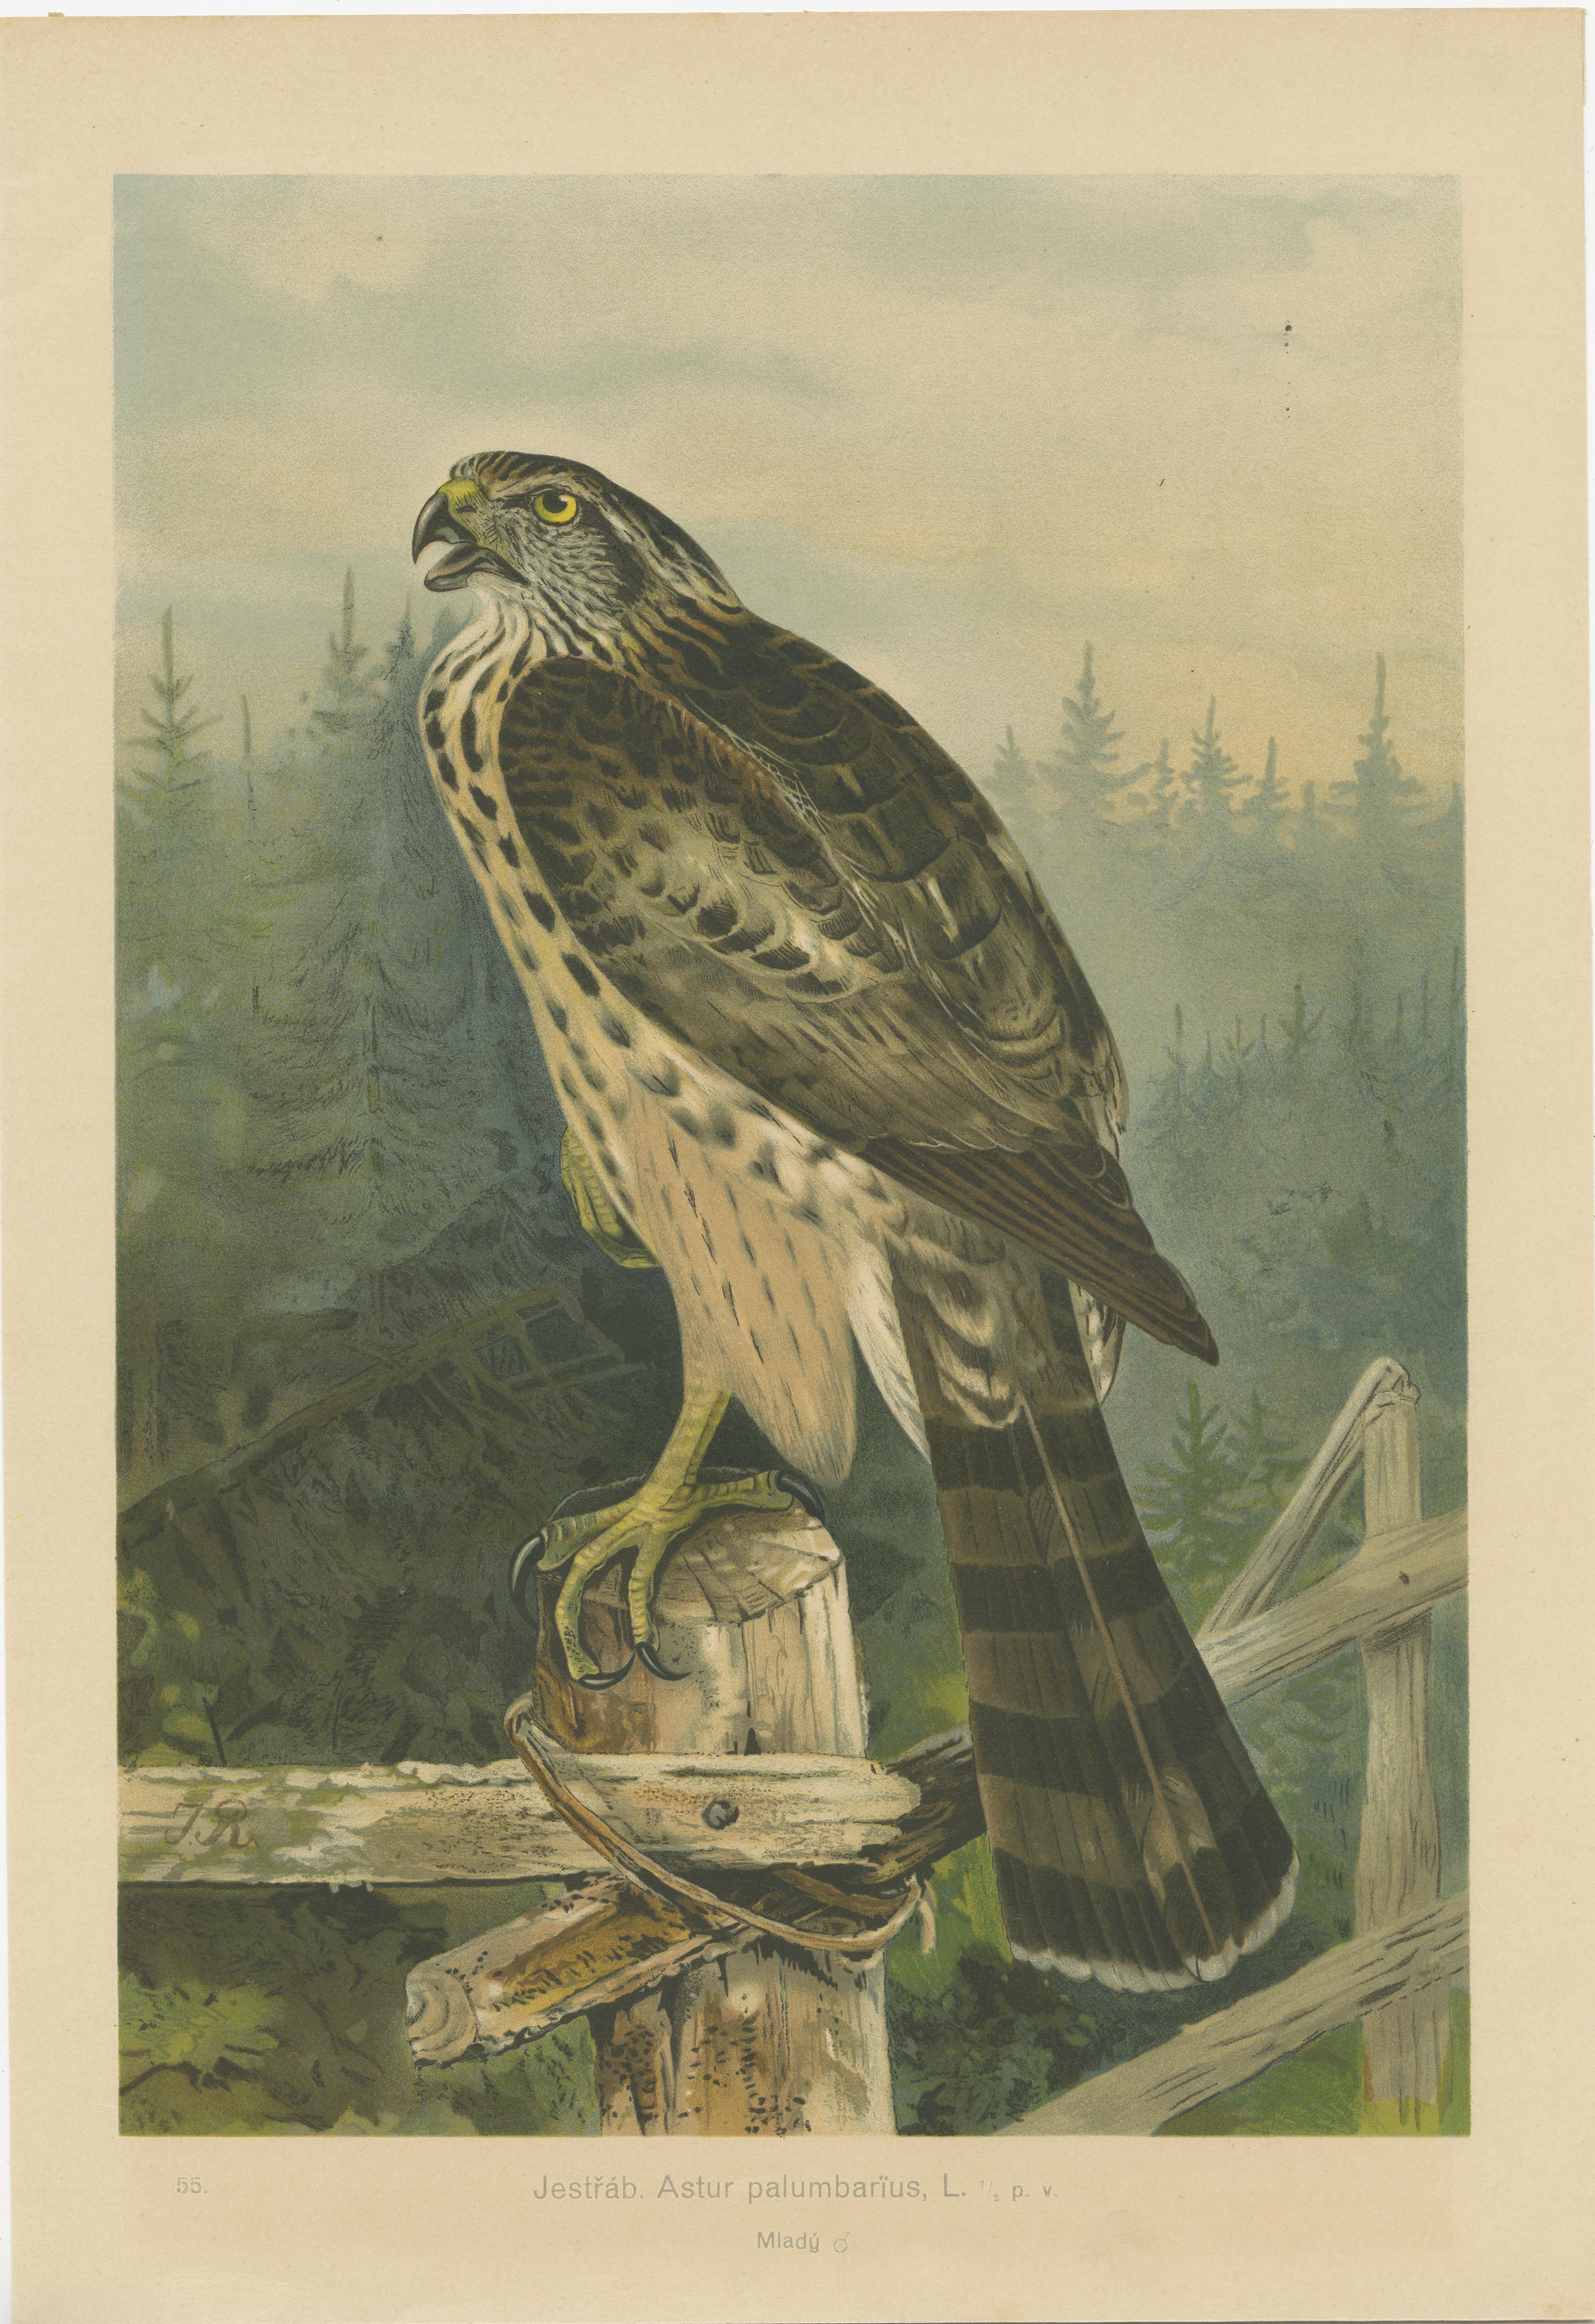 The birds depicted in the provided chromolithographs are:

1. In the first image, the bird is labeled as 